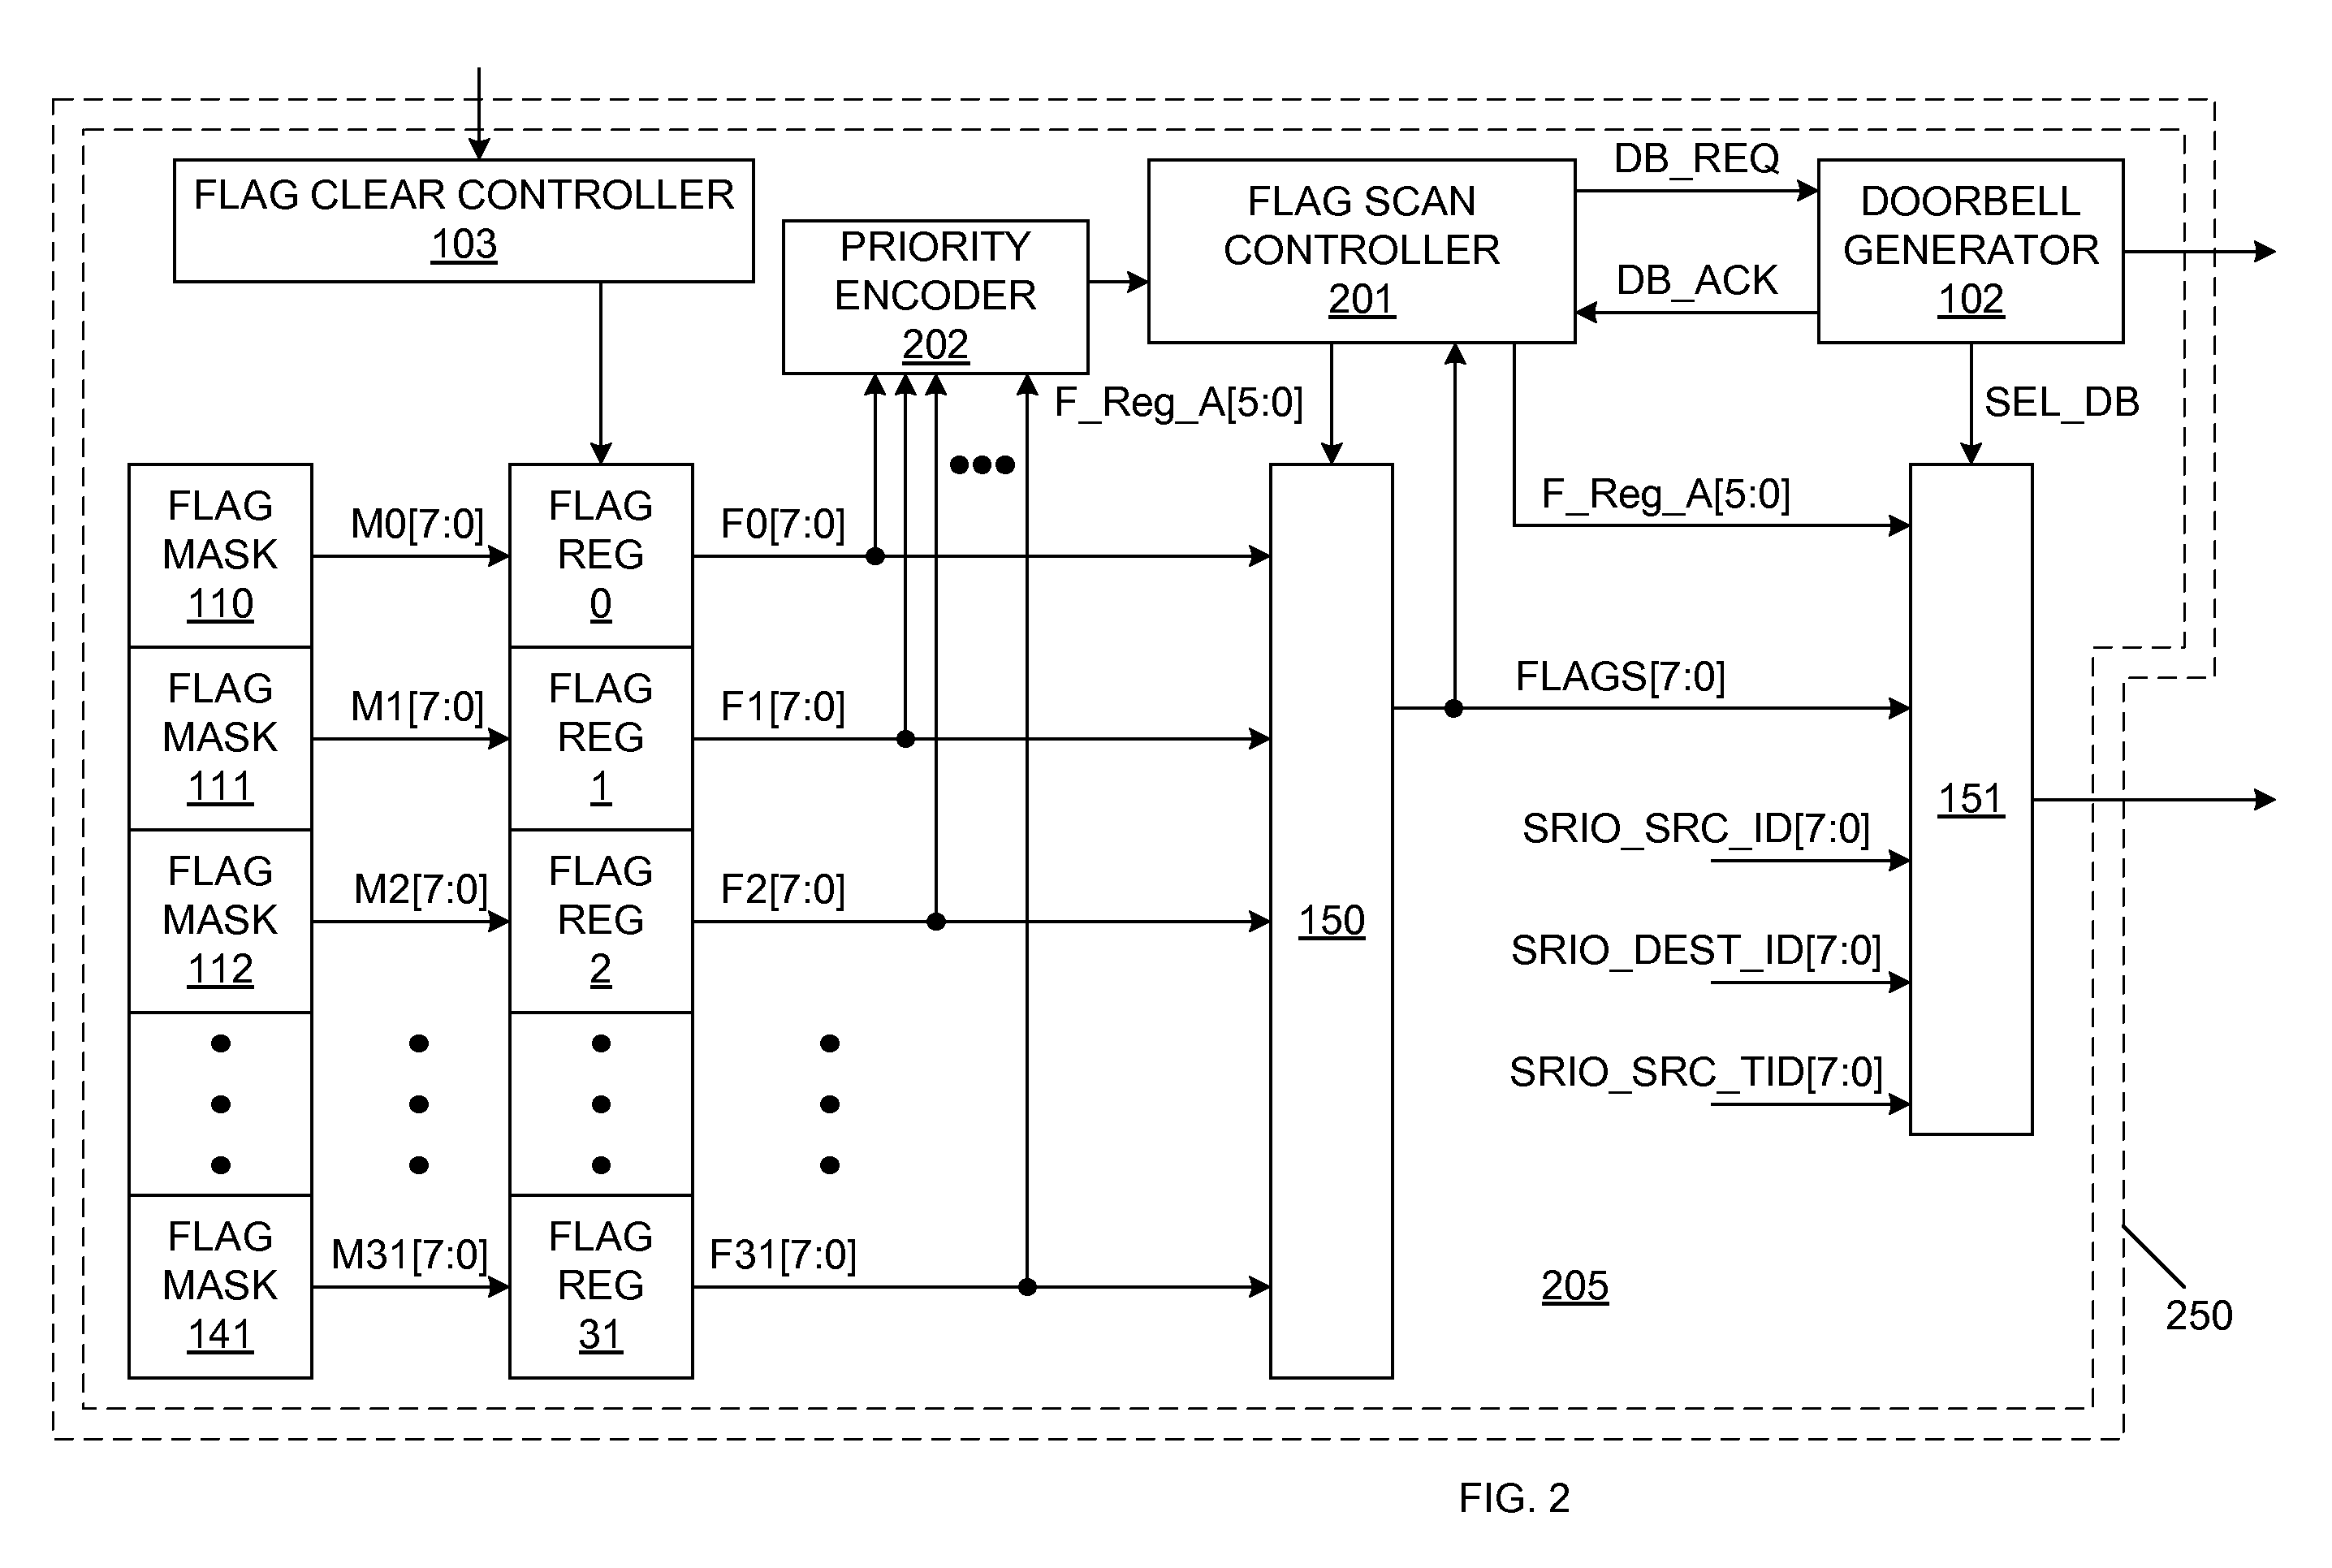 Rapid input/output doorbell coalescing to minimize CPU utilization and reduce system interrupt latency